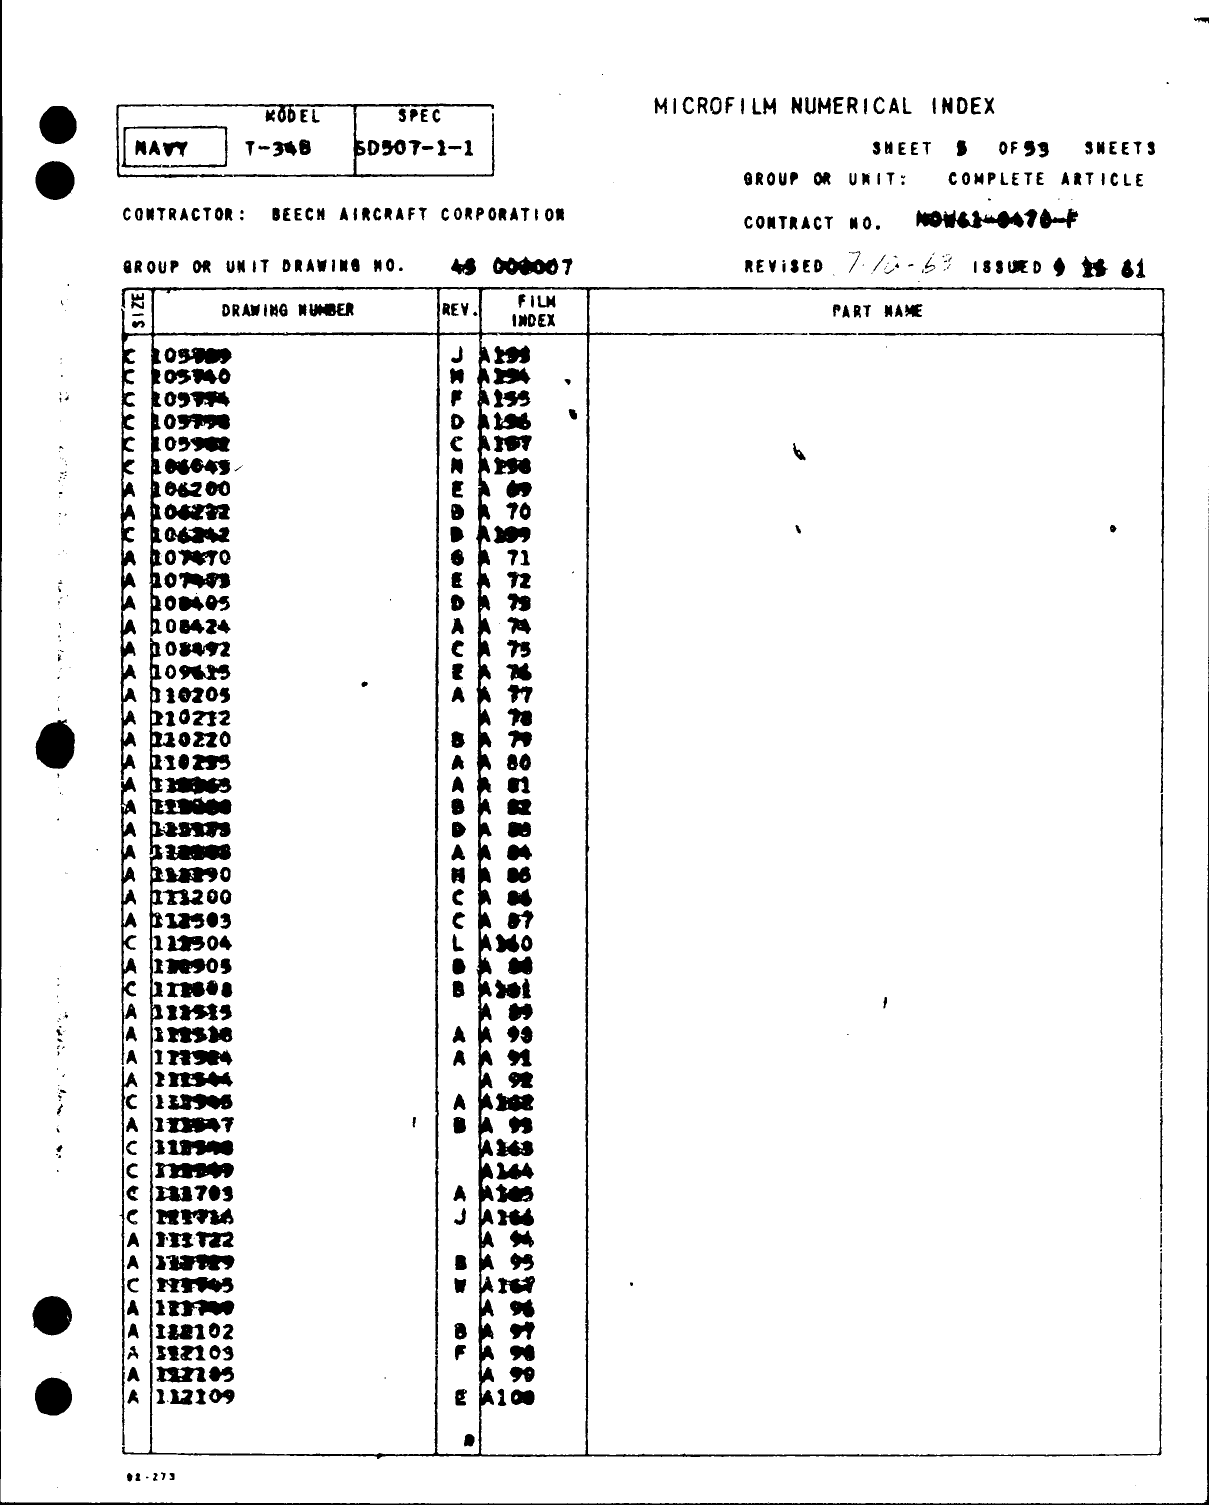 Sample page 5 from AirCorps Library document: Microfilm Numerical Index for T-34B